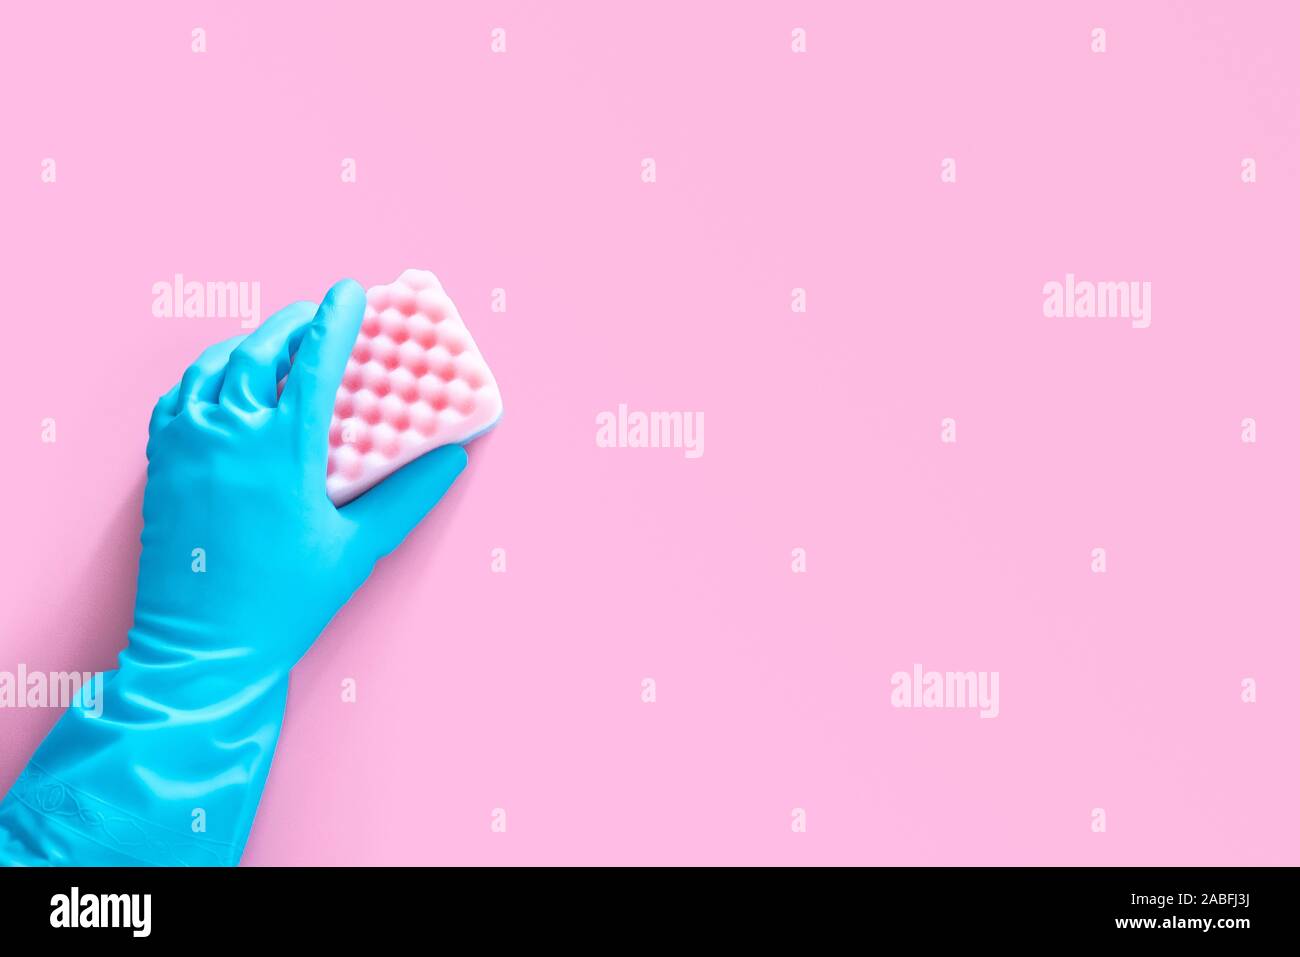 hand in blue rubber glove holding pink cleaning sponge isolated on pink background with copy space for text or logo Stock Photo